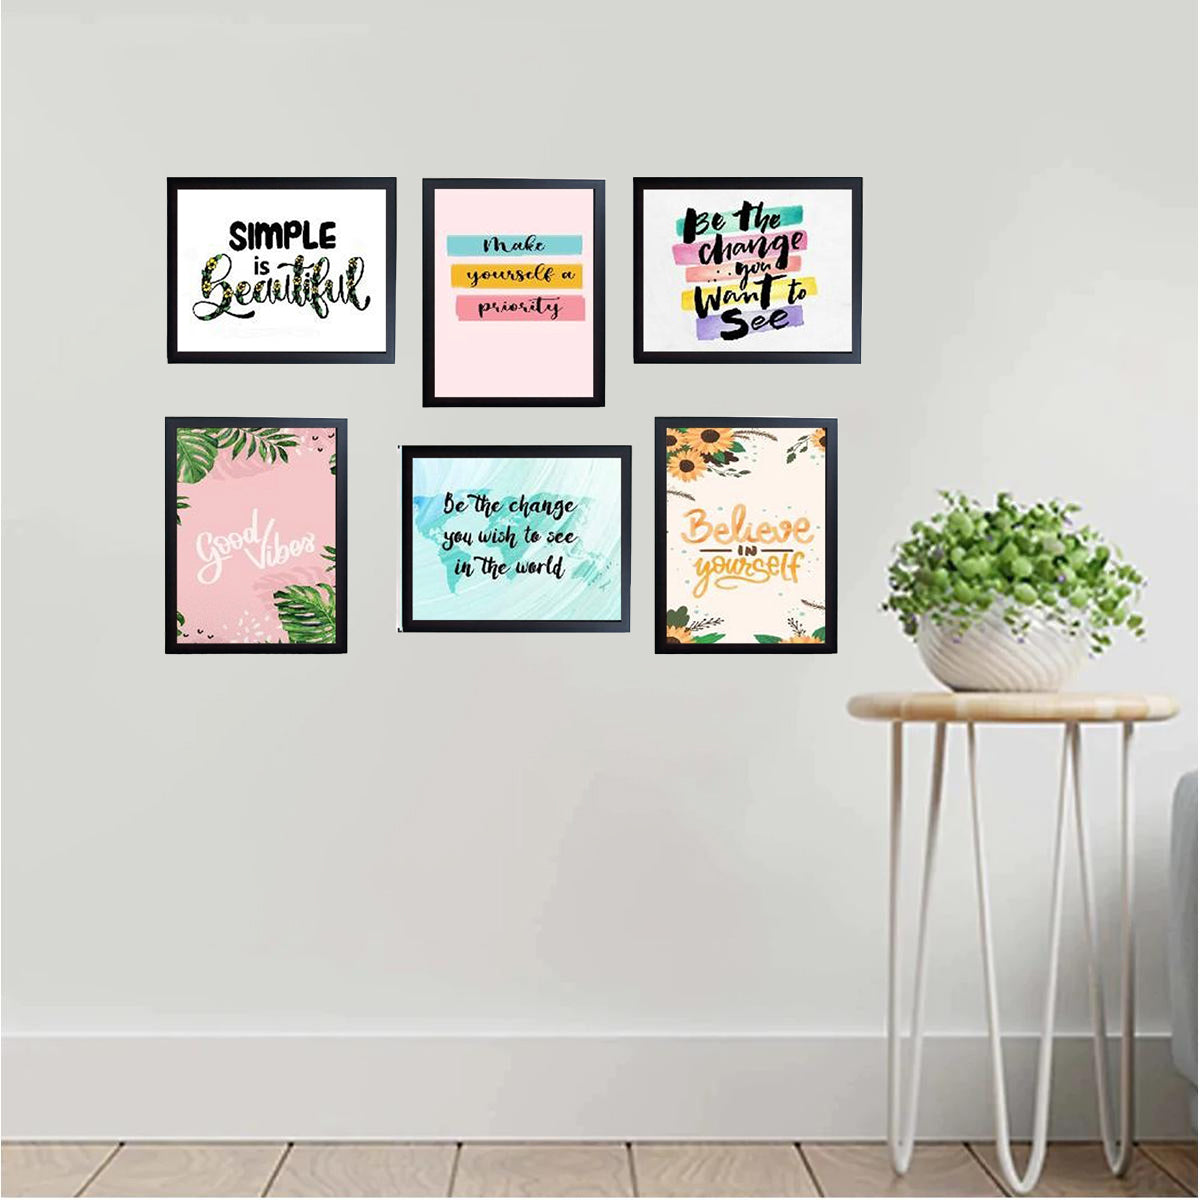 Full Wall Sets with Our Prints